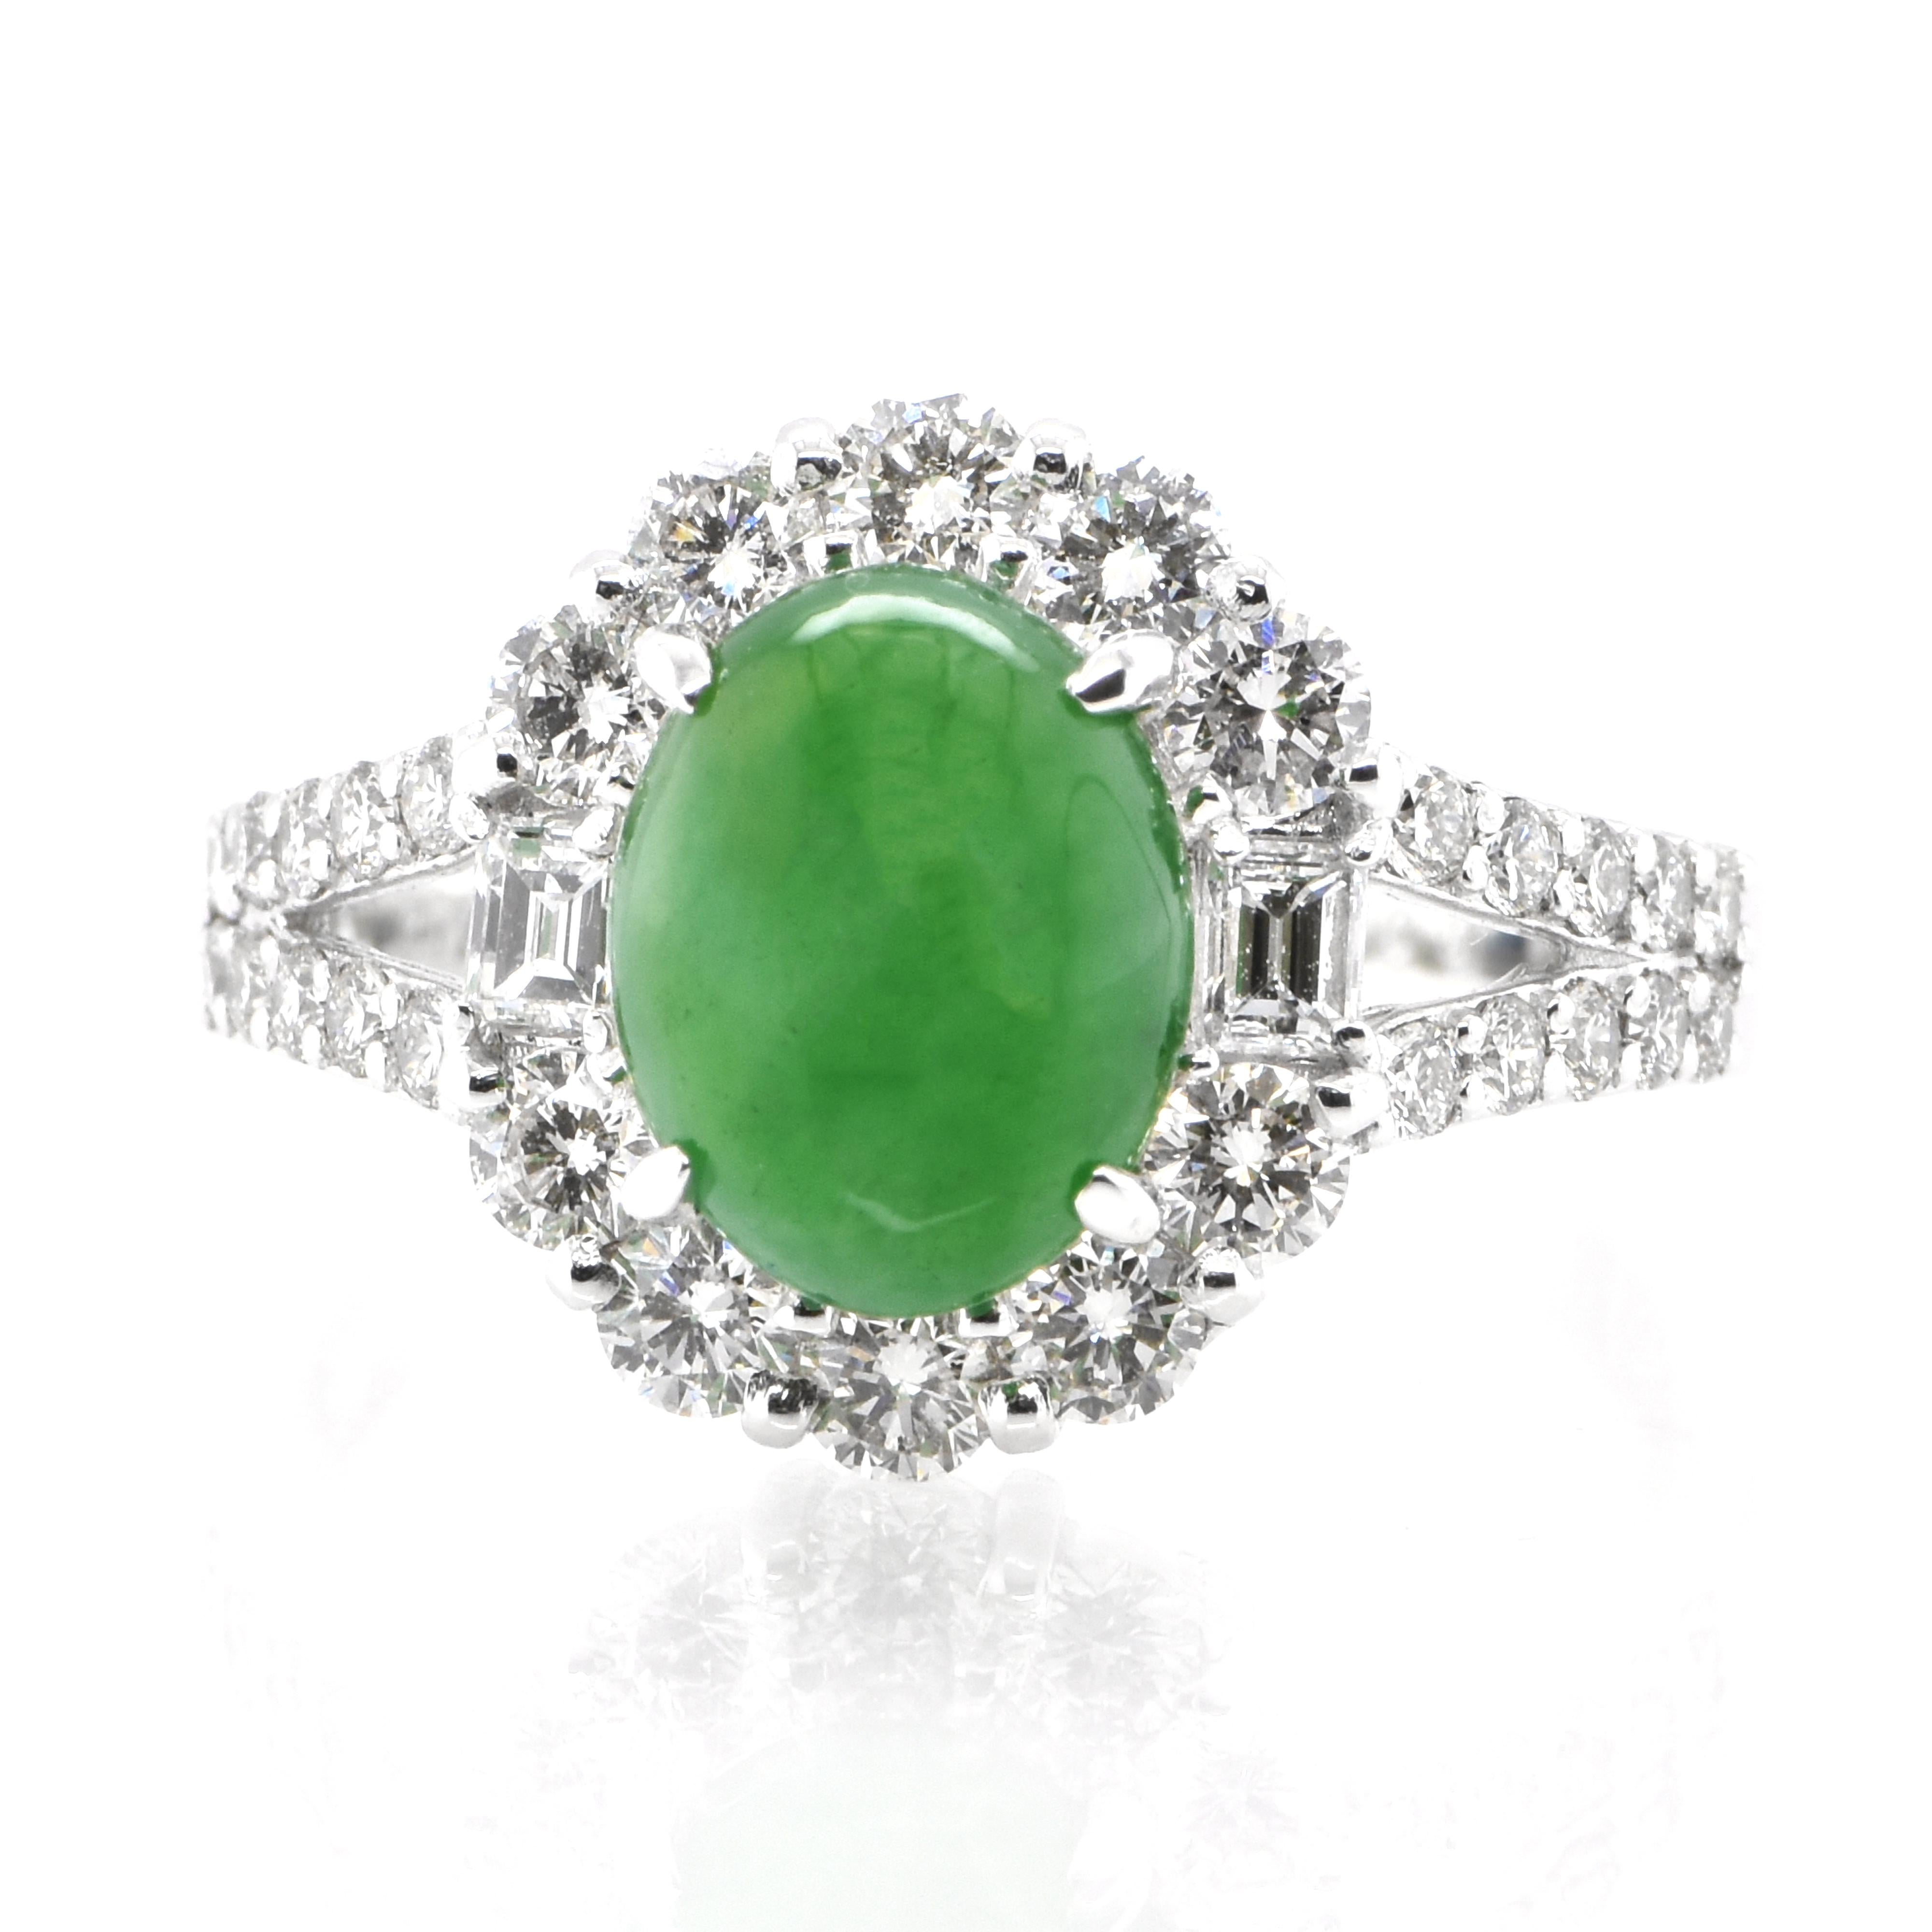 A beautiful Ring featuring a 2.21 Carat, Natural, Non-dyed Jadeite and 0.95 Carats of Diamond Accents set in Platinum. Jadeite has been cherished for millennia. Its nature is pure and enduring, yet sensuous and luxurious. Jadeite’s exceptional look